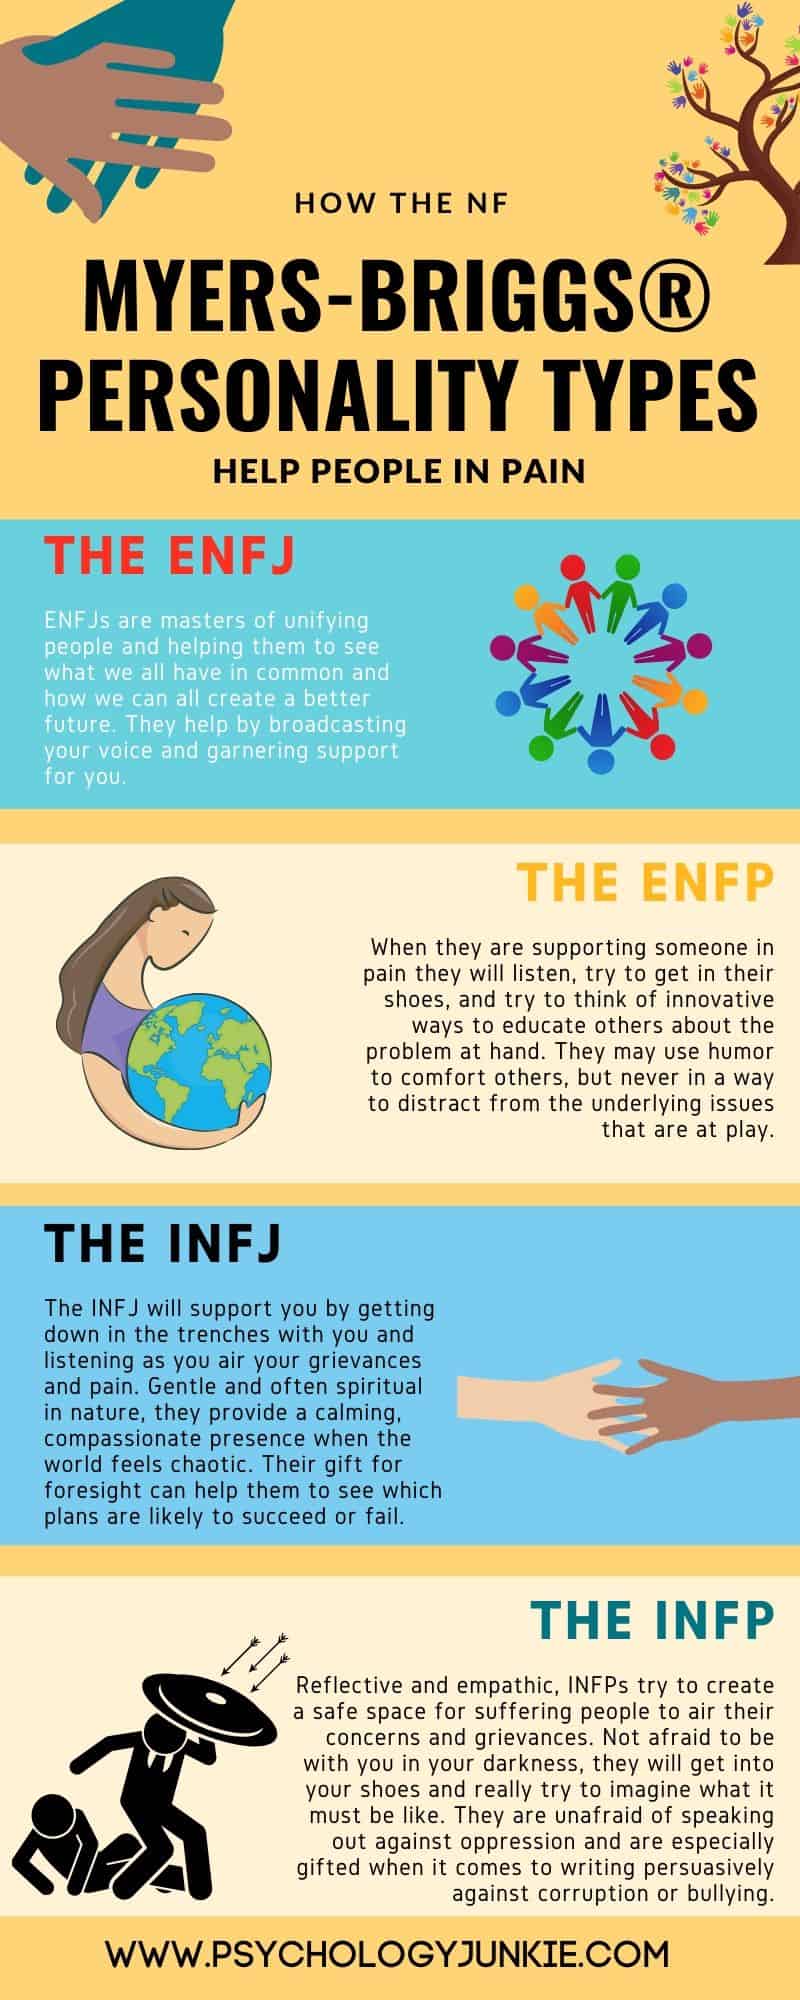 The Emotional World of Every Myers-Briggs® Personality Type - Psychology  Junkie